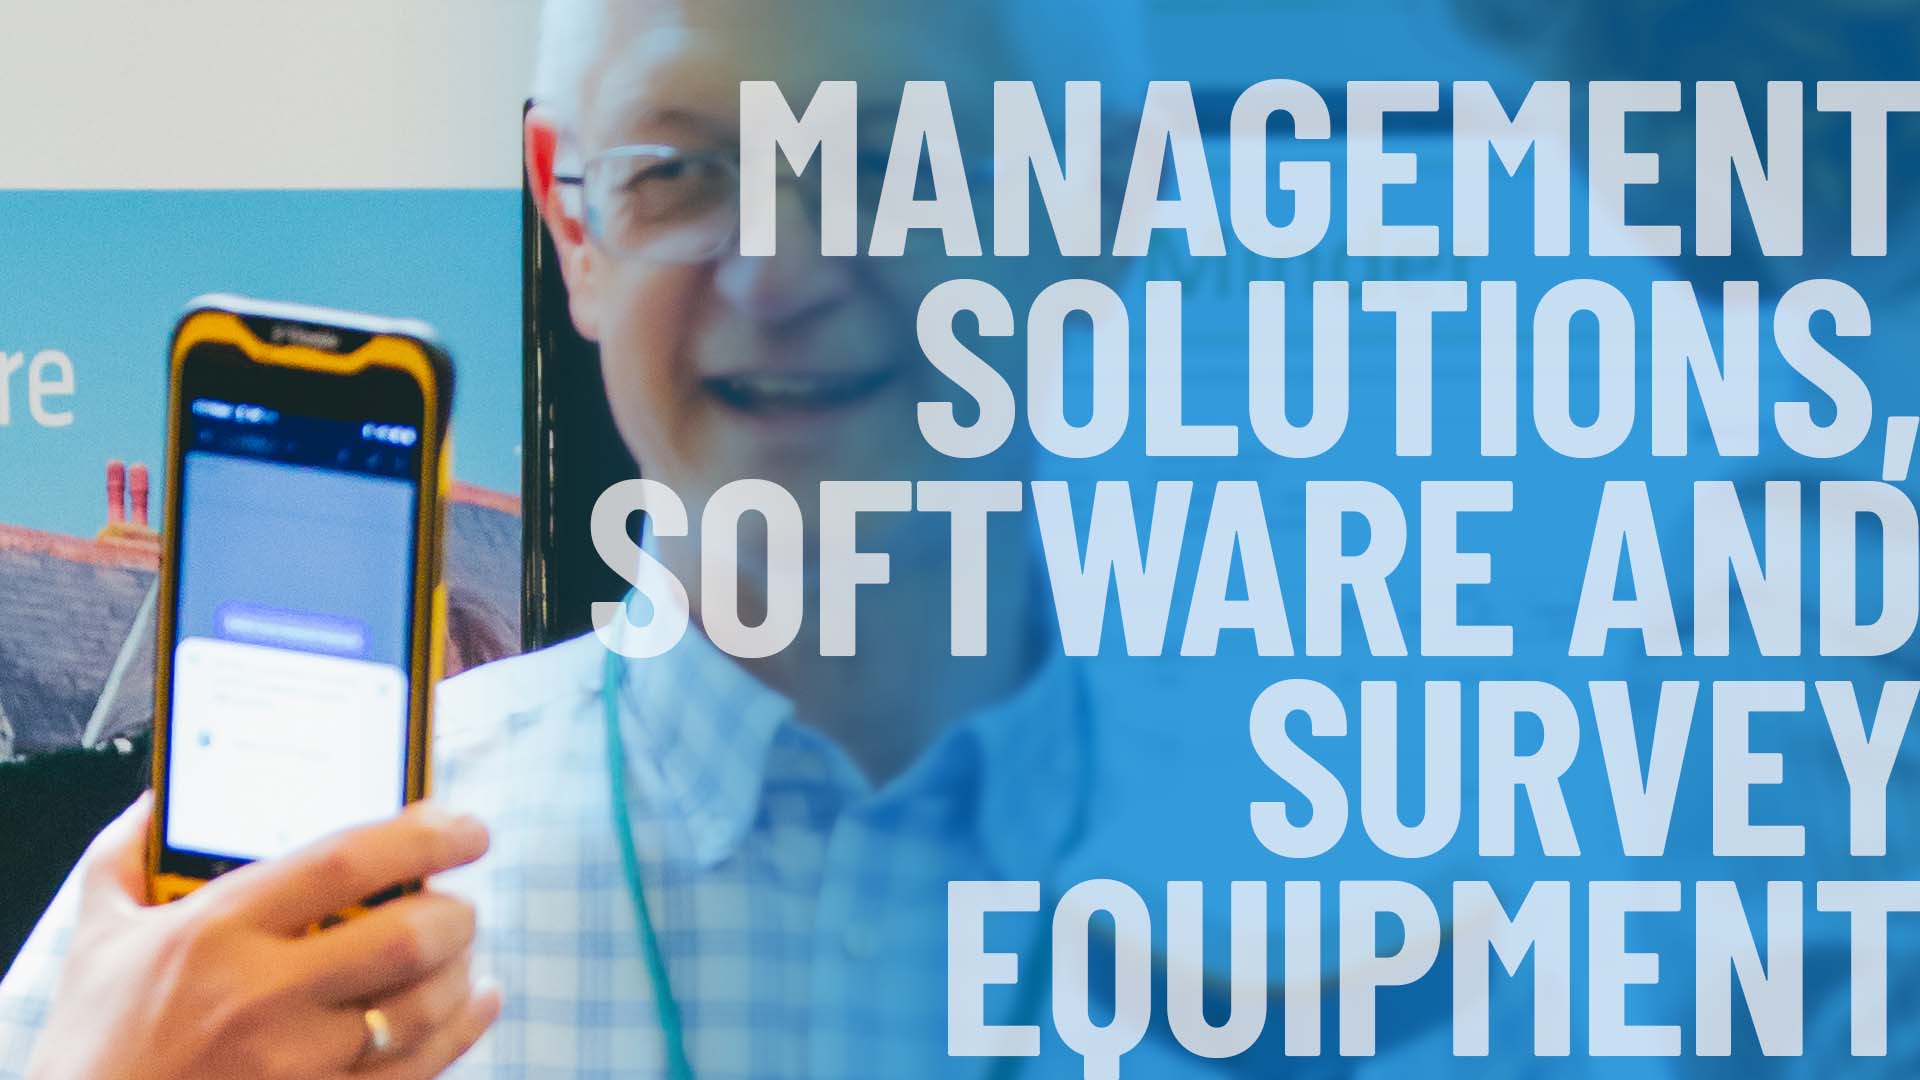 Management Solutions, Software and Survey Equipment